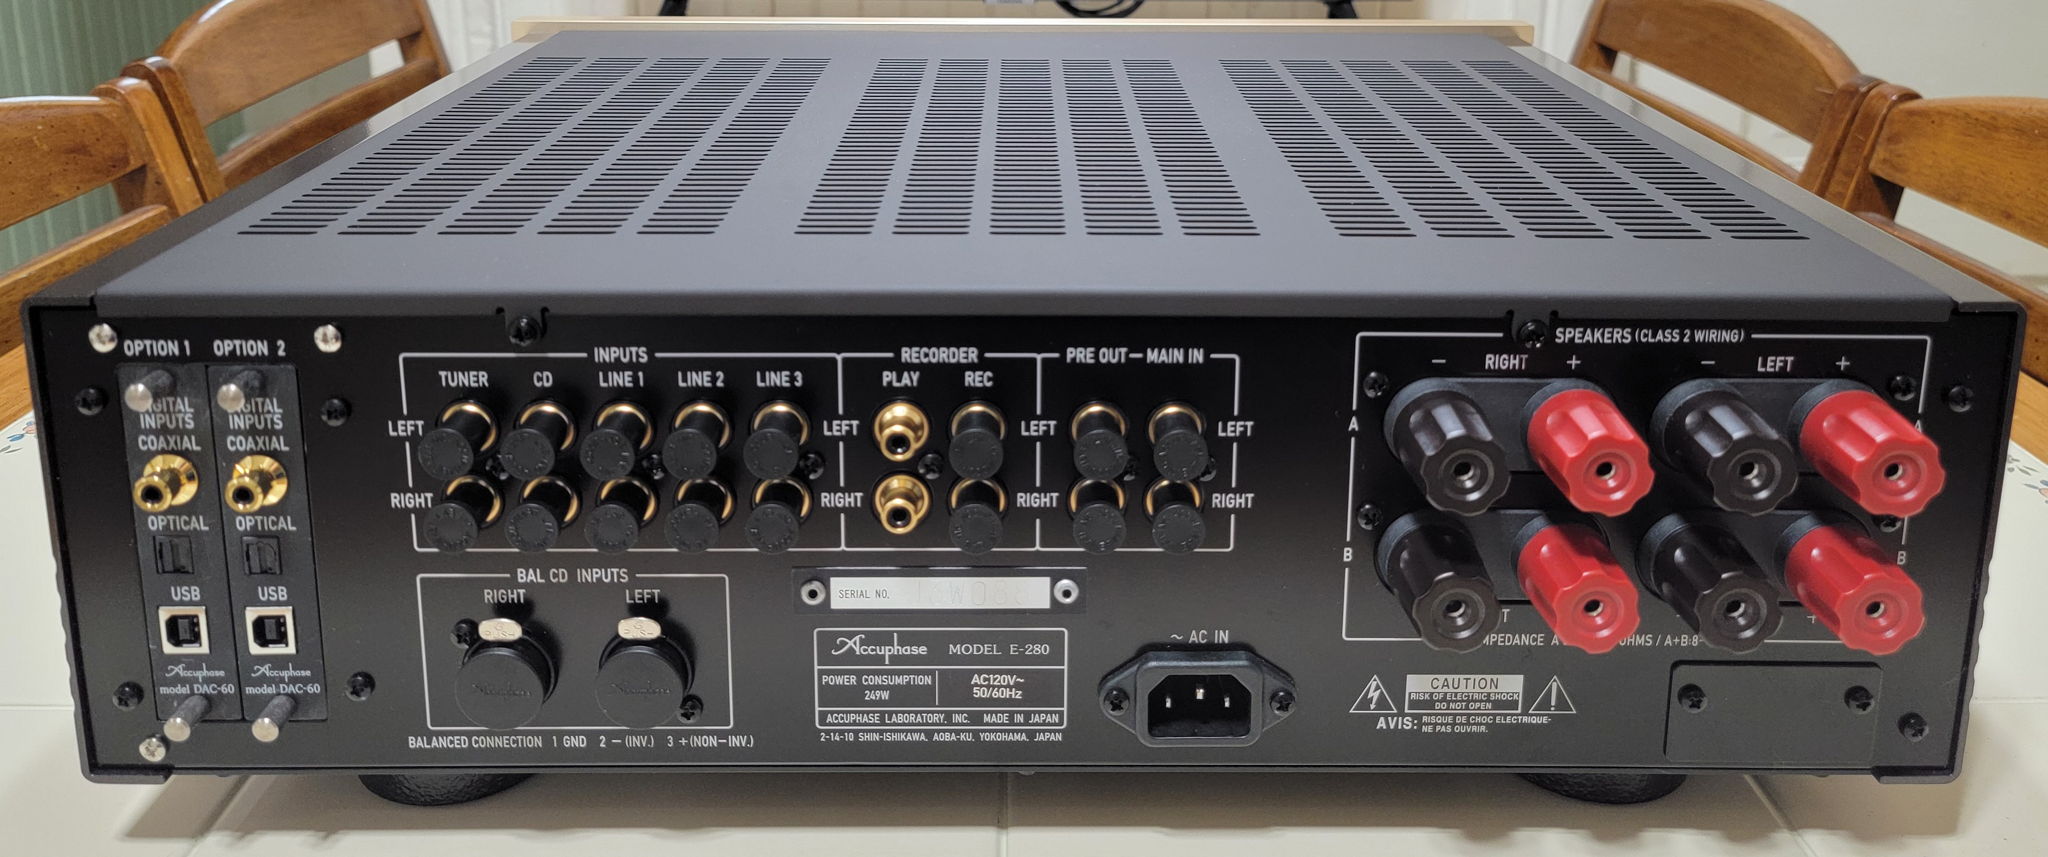 Accuphase E-280 with 2 DAC-60 cards 4